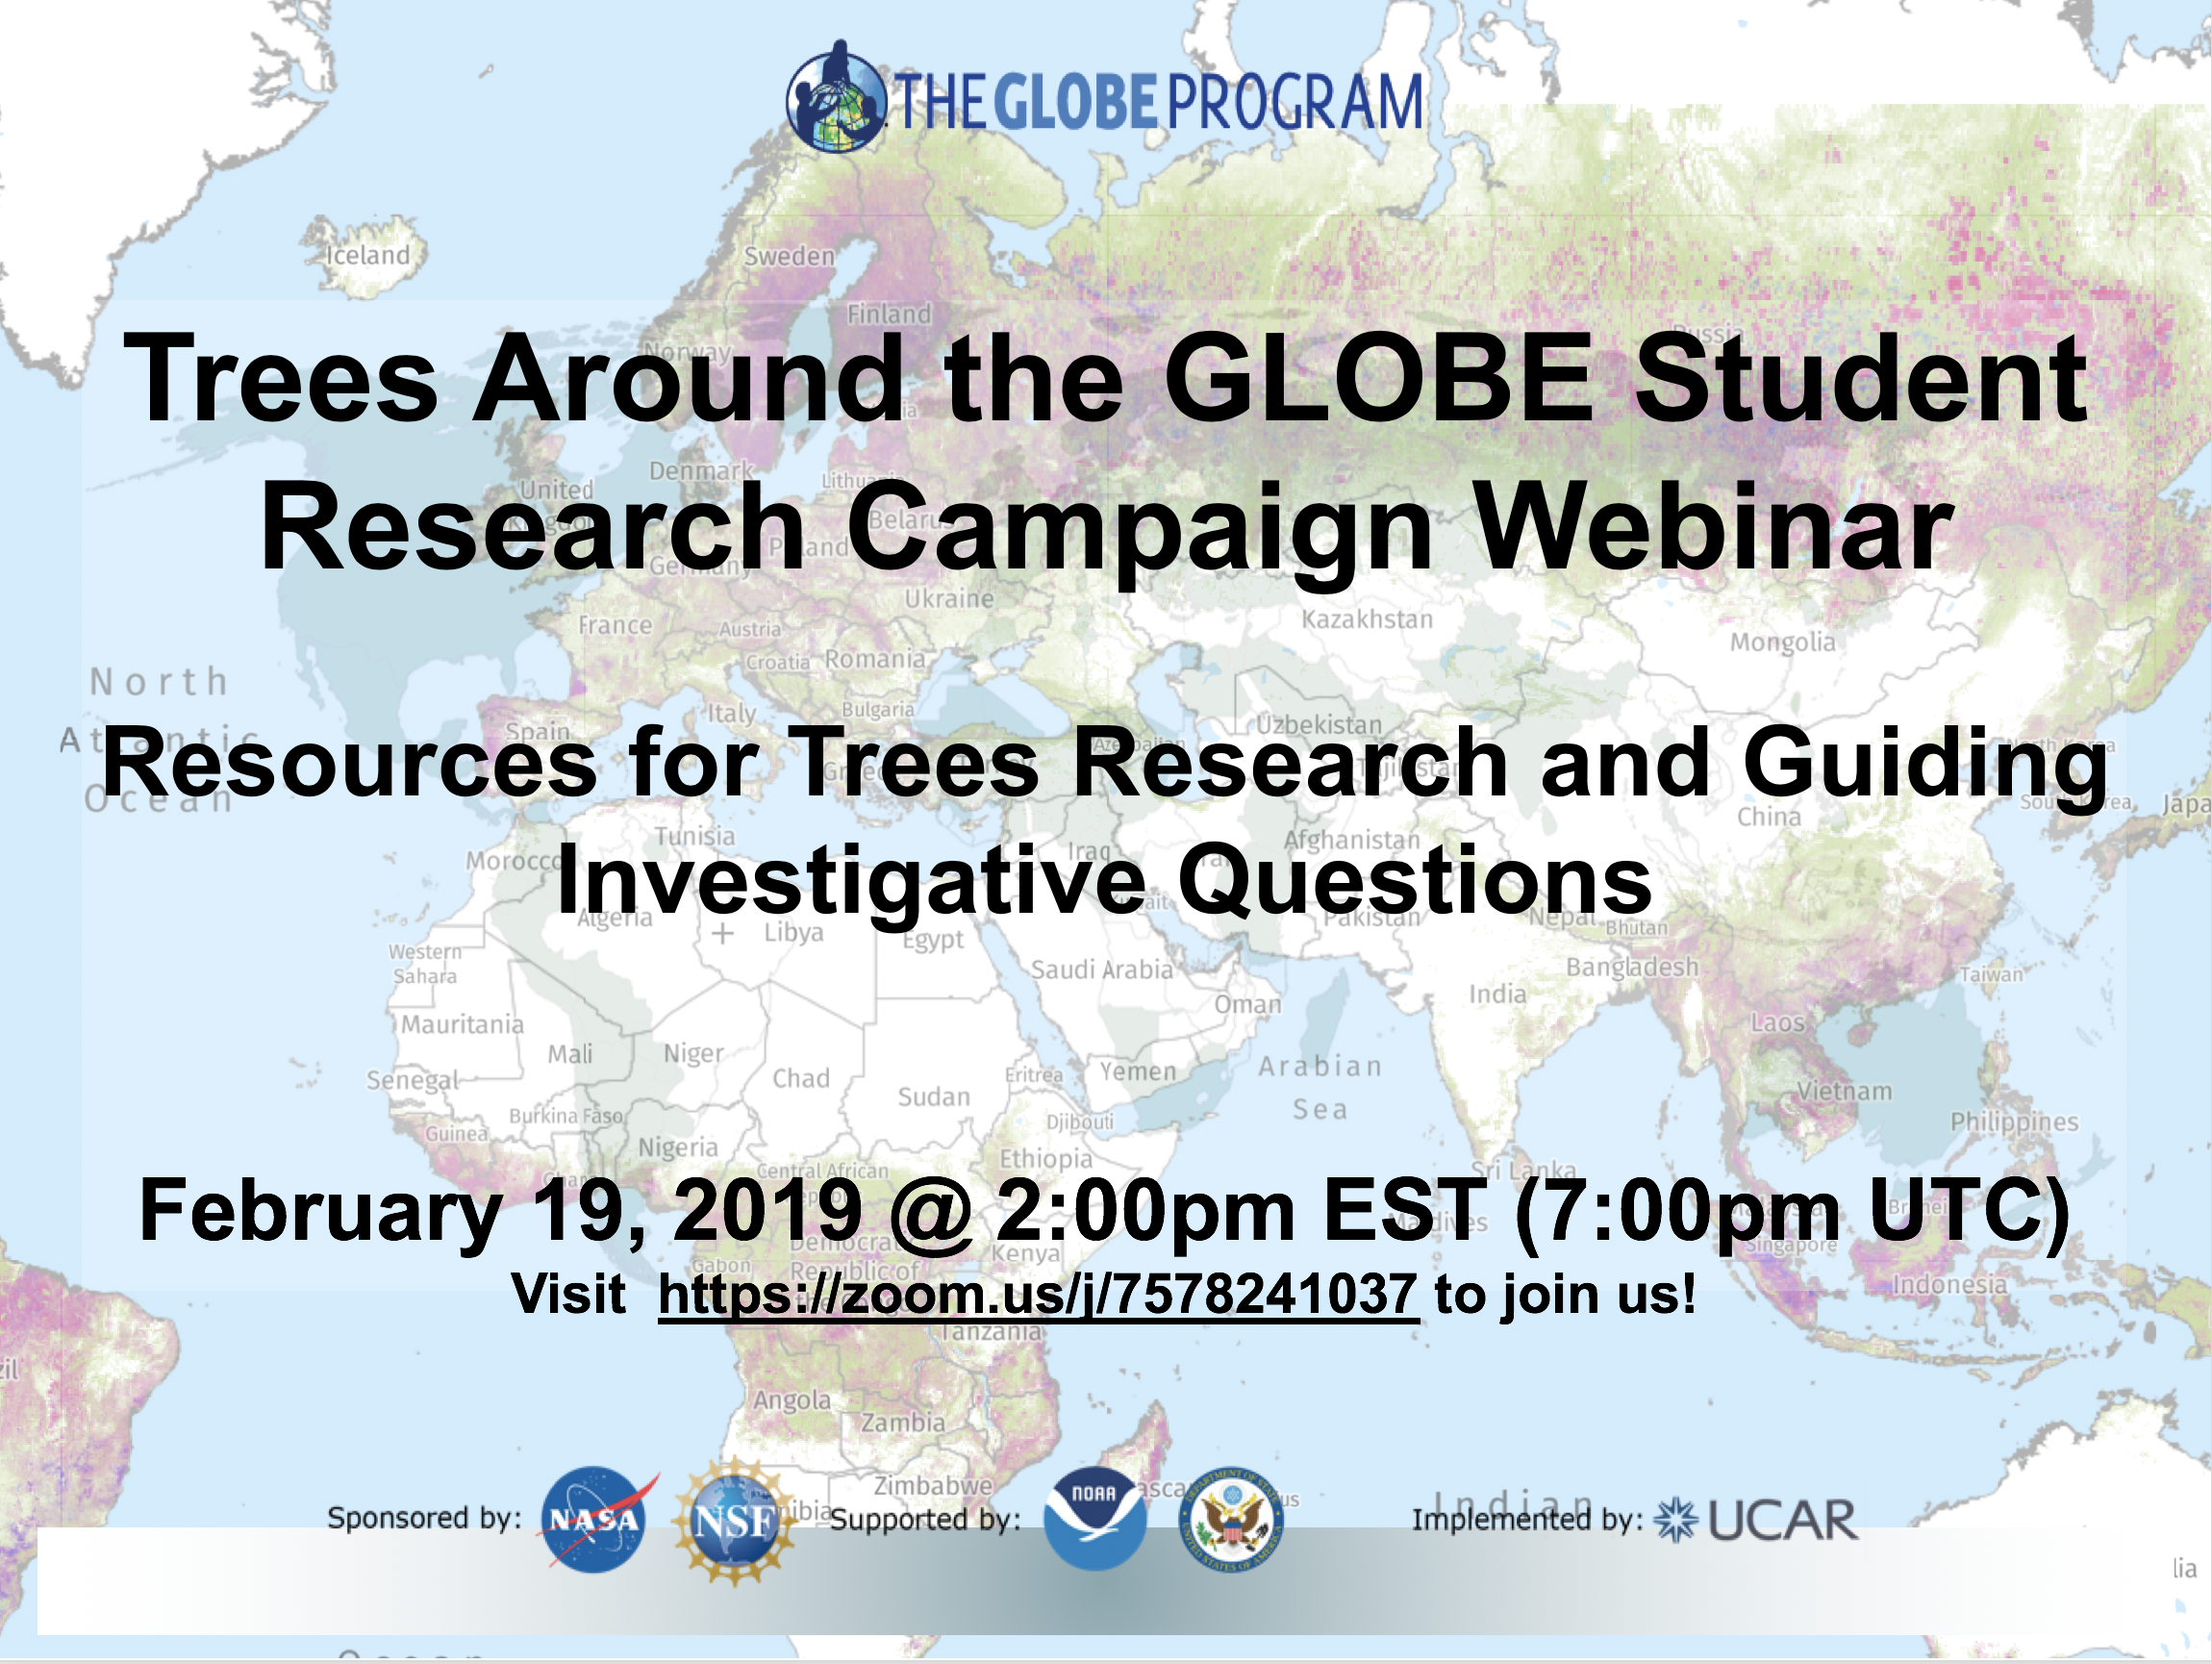 Graphic providing time/date information for the Trees Around the GLOBE webinar on 19 Feb 2019